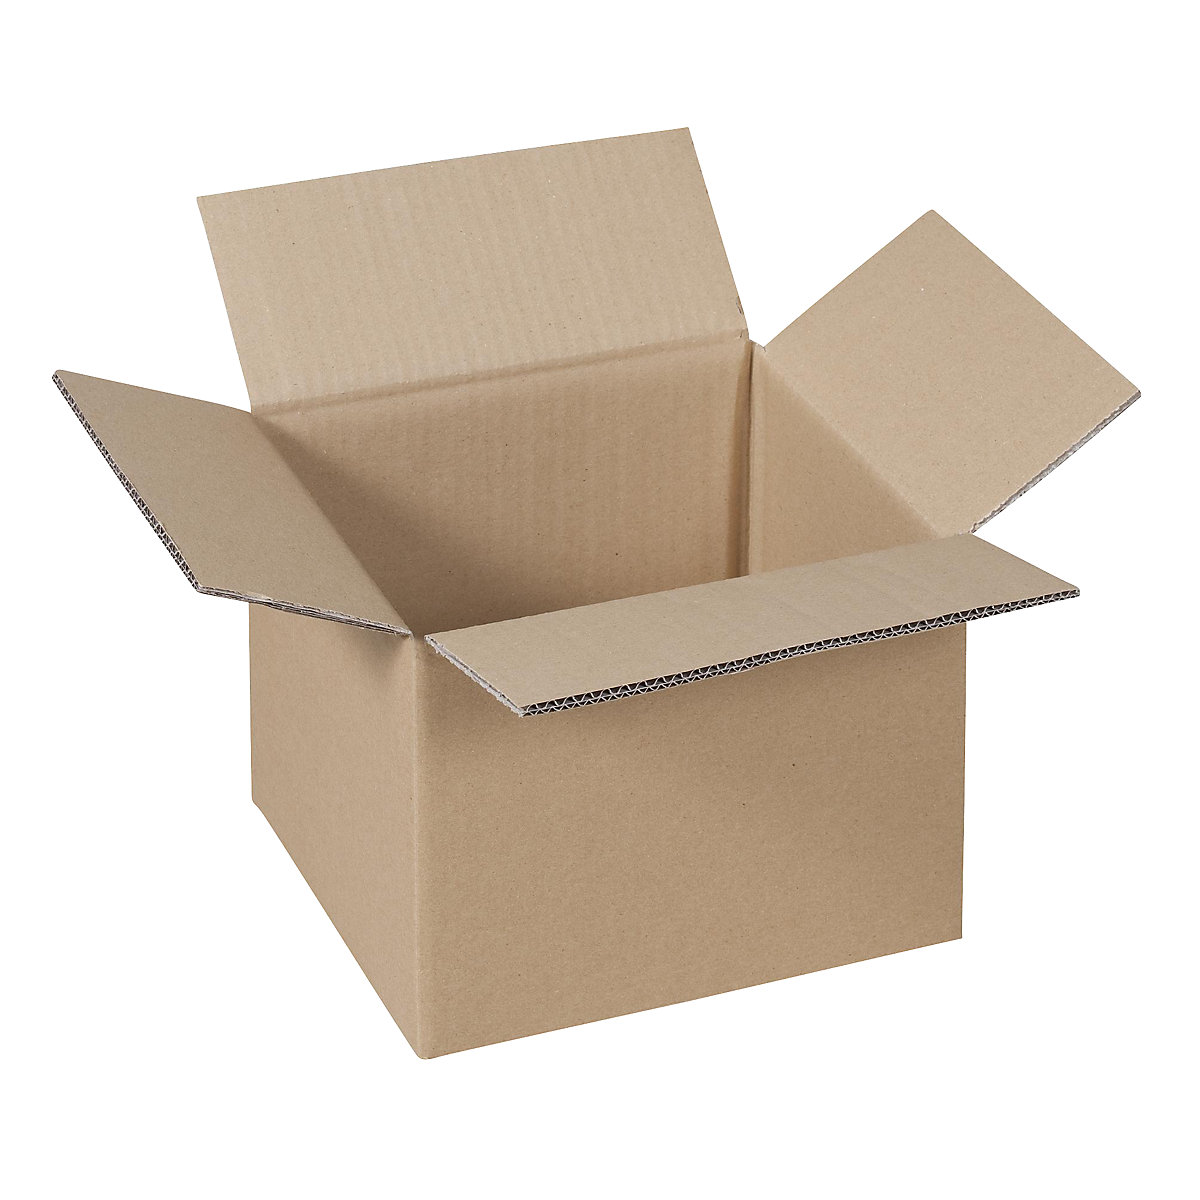 Folding cardboard box, FEFCO 0201, made of double fluted cardboard, internal dimensions 234 x 184 x 168 mm, pack of 50-6